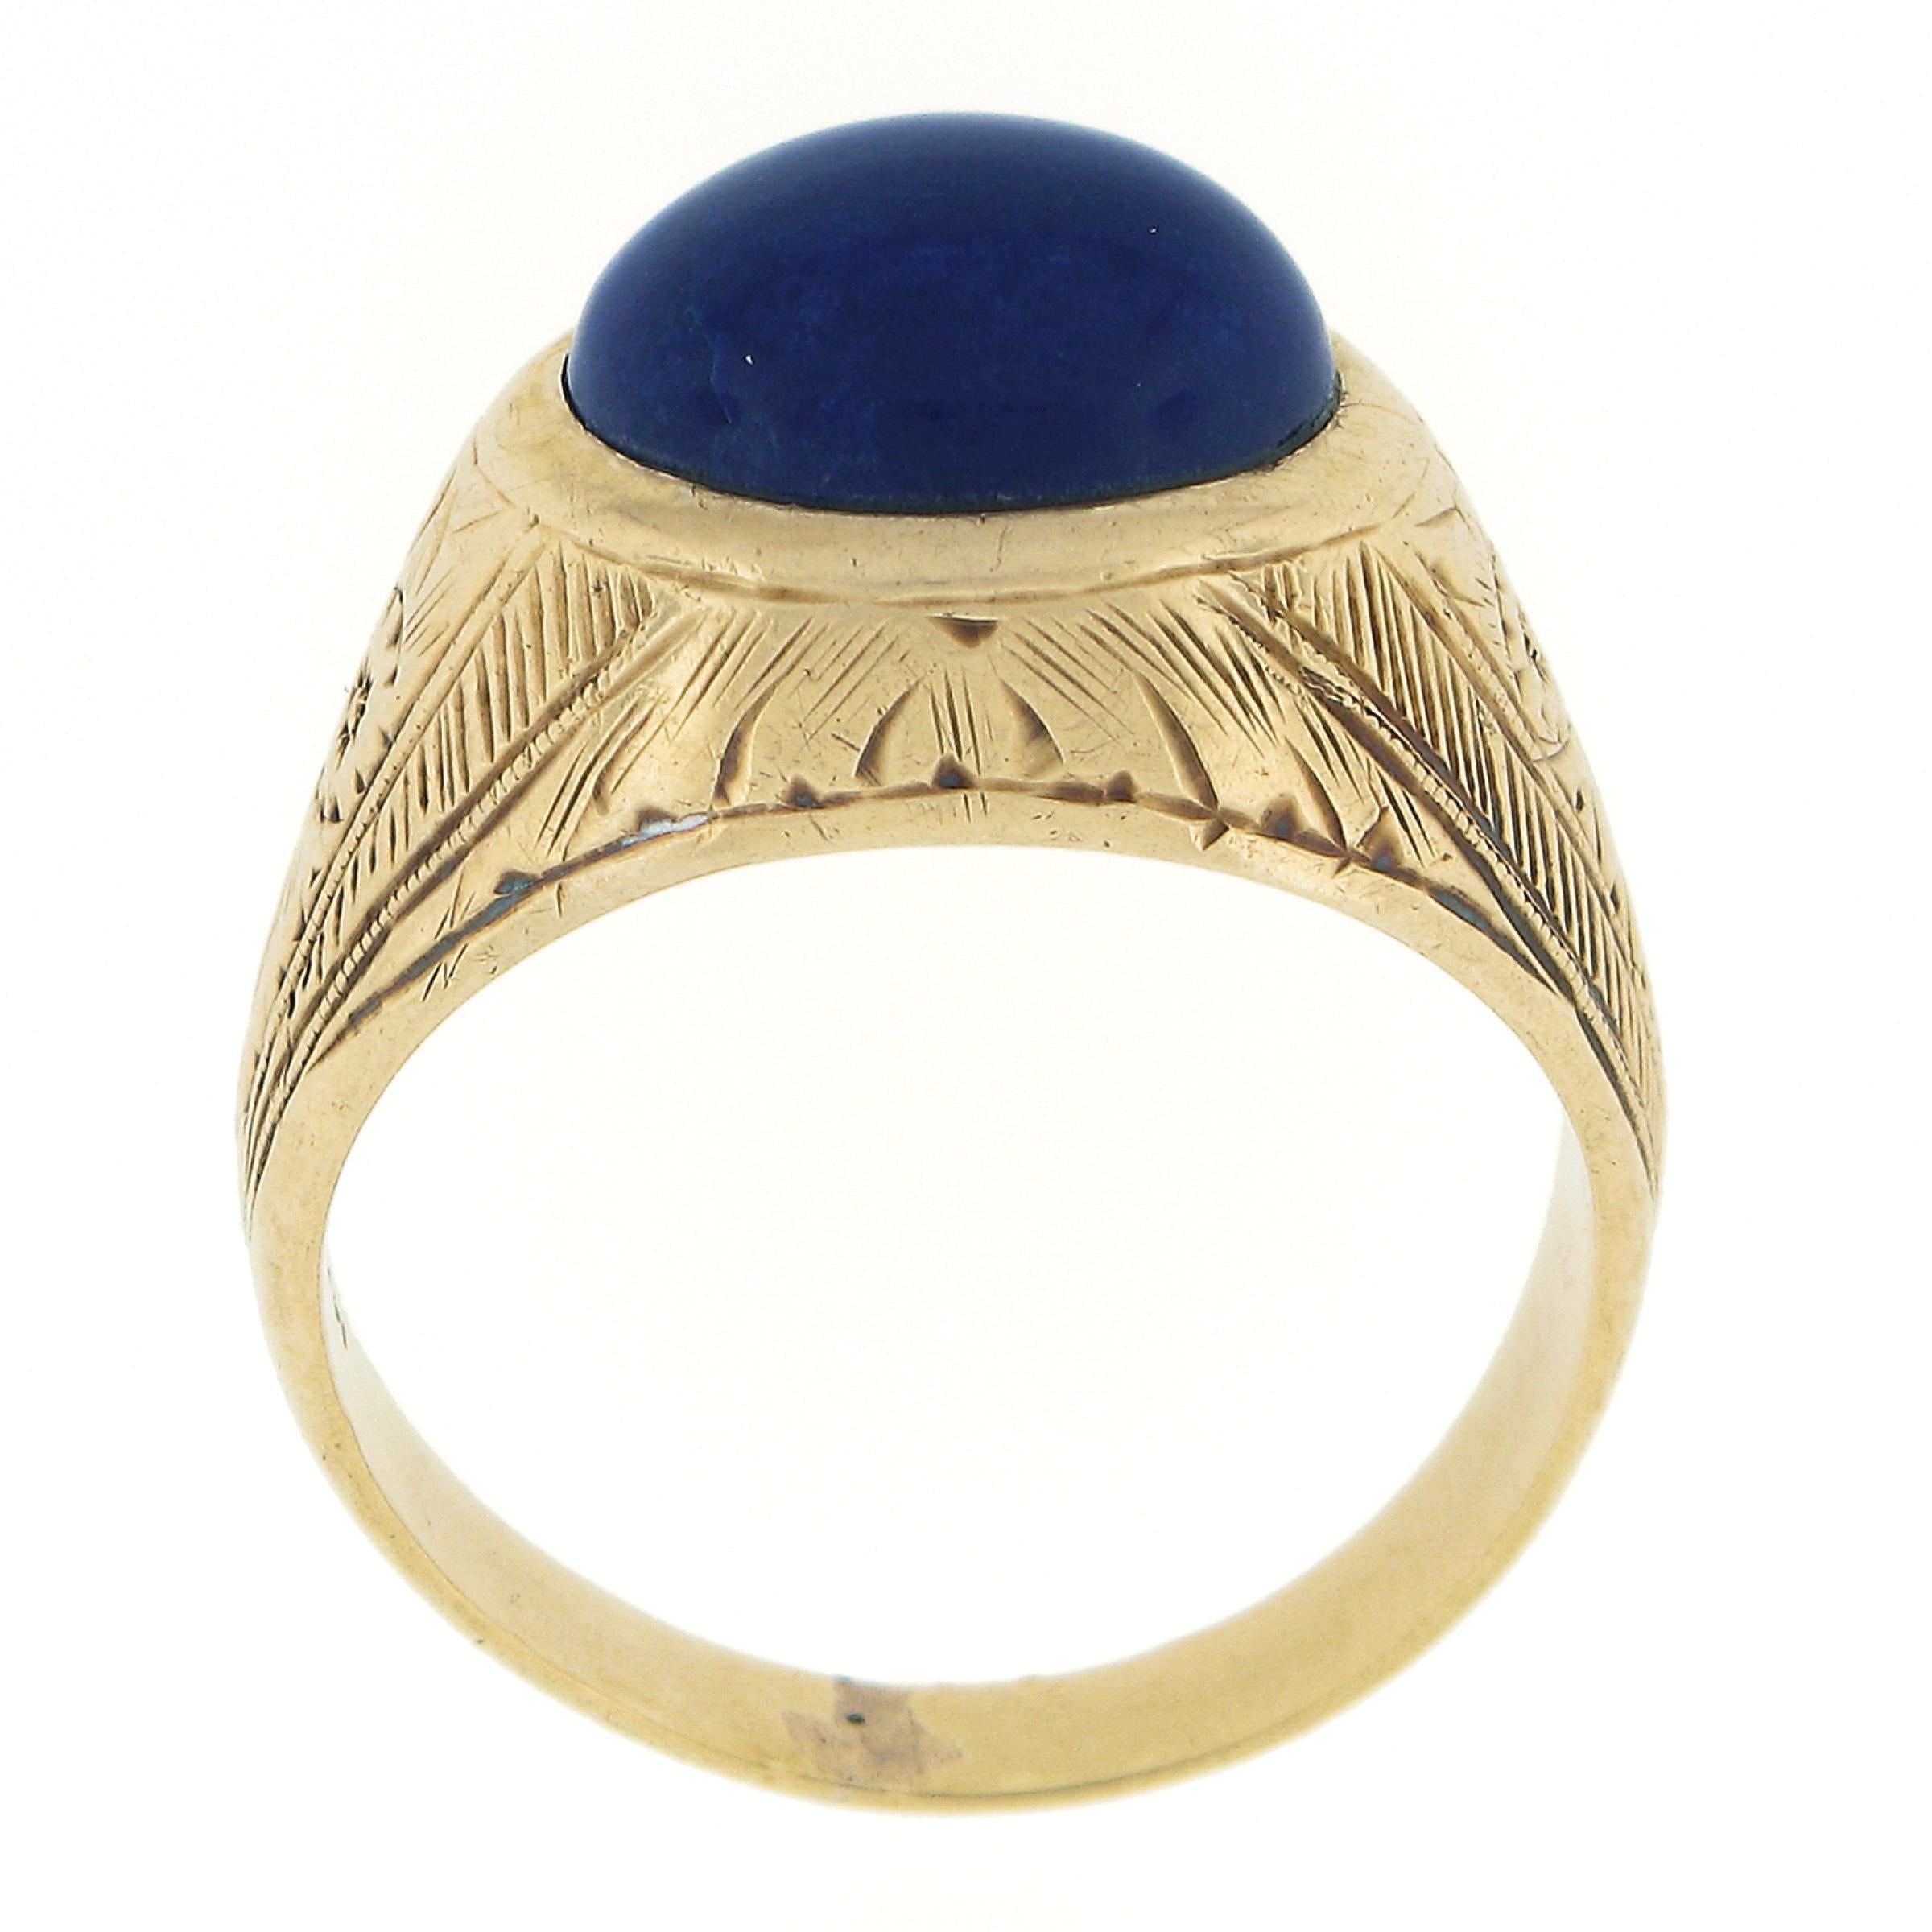 Antique Men's 14k Yellow Gold Oval Cabochon Bezel Lapis Hand Engraved Work Ring 2